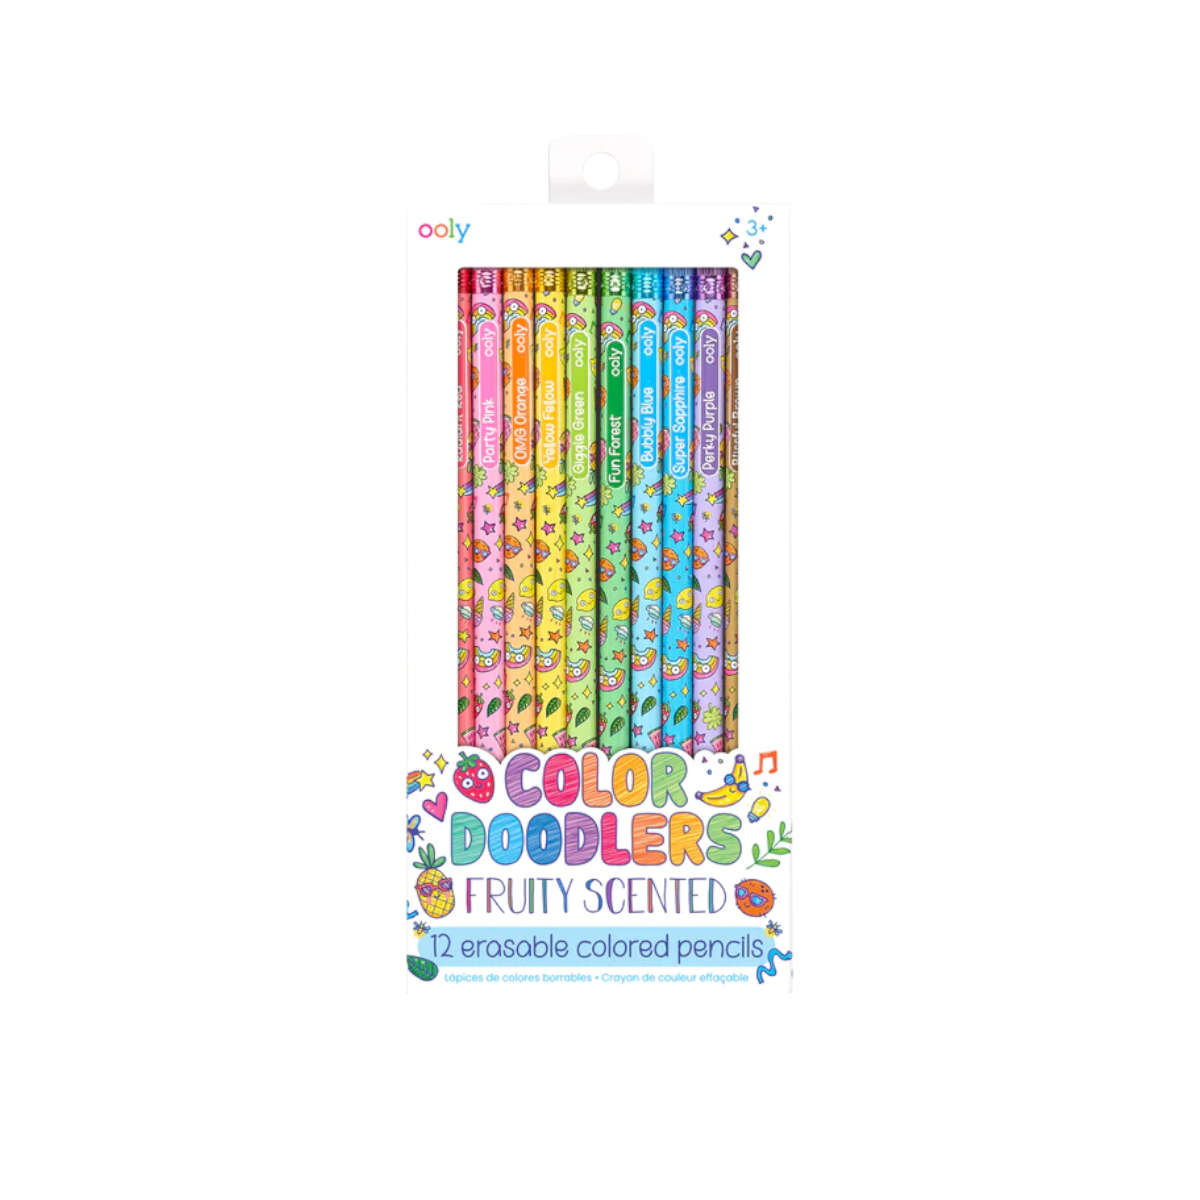 Ooly Color Doodlers Fruity Scented Erasable Colored Pencils